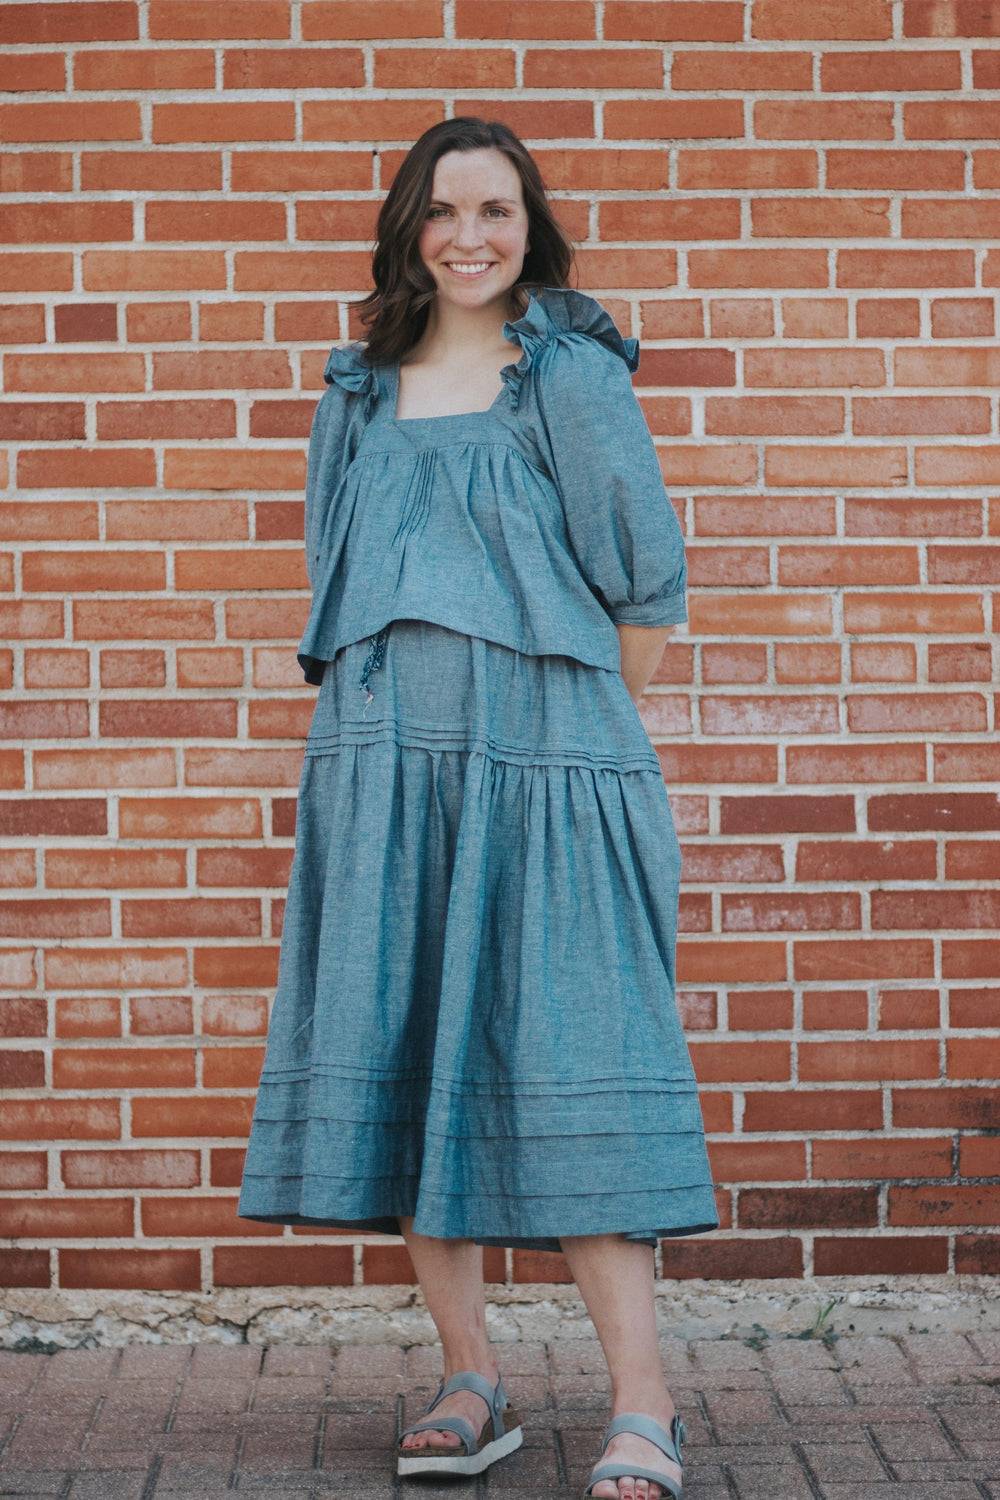 Woman wearing the Zamora Skirt sewing pattern from Madswick on The Fold Line. A skirt pattern made in linen, cotton, or tencel fabrics, featuring an elasticated waistband, two gathered tiers, and midi length.